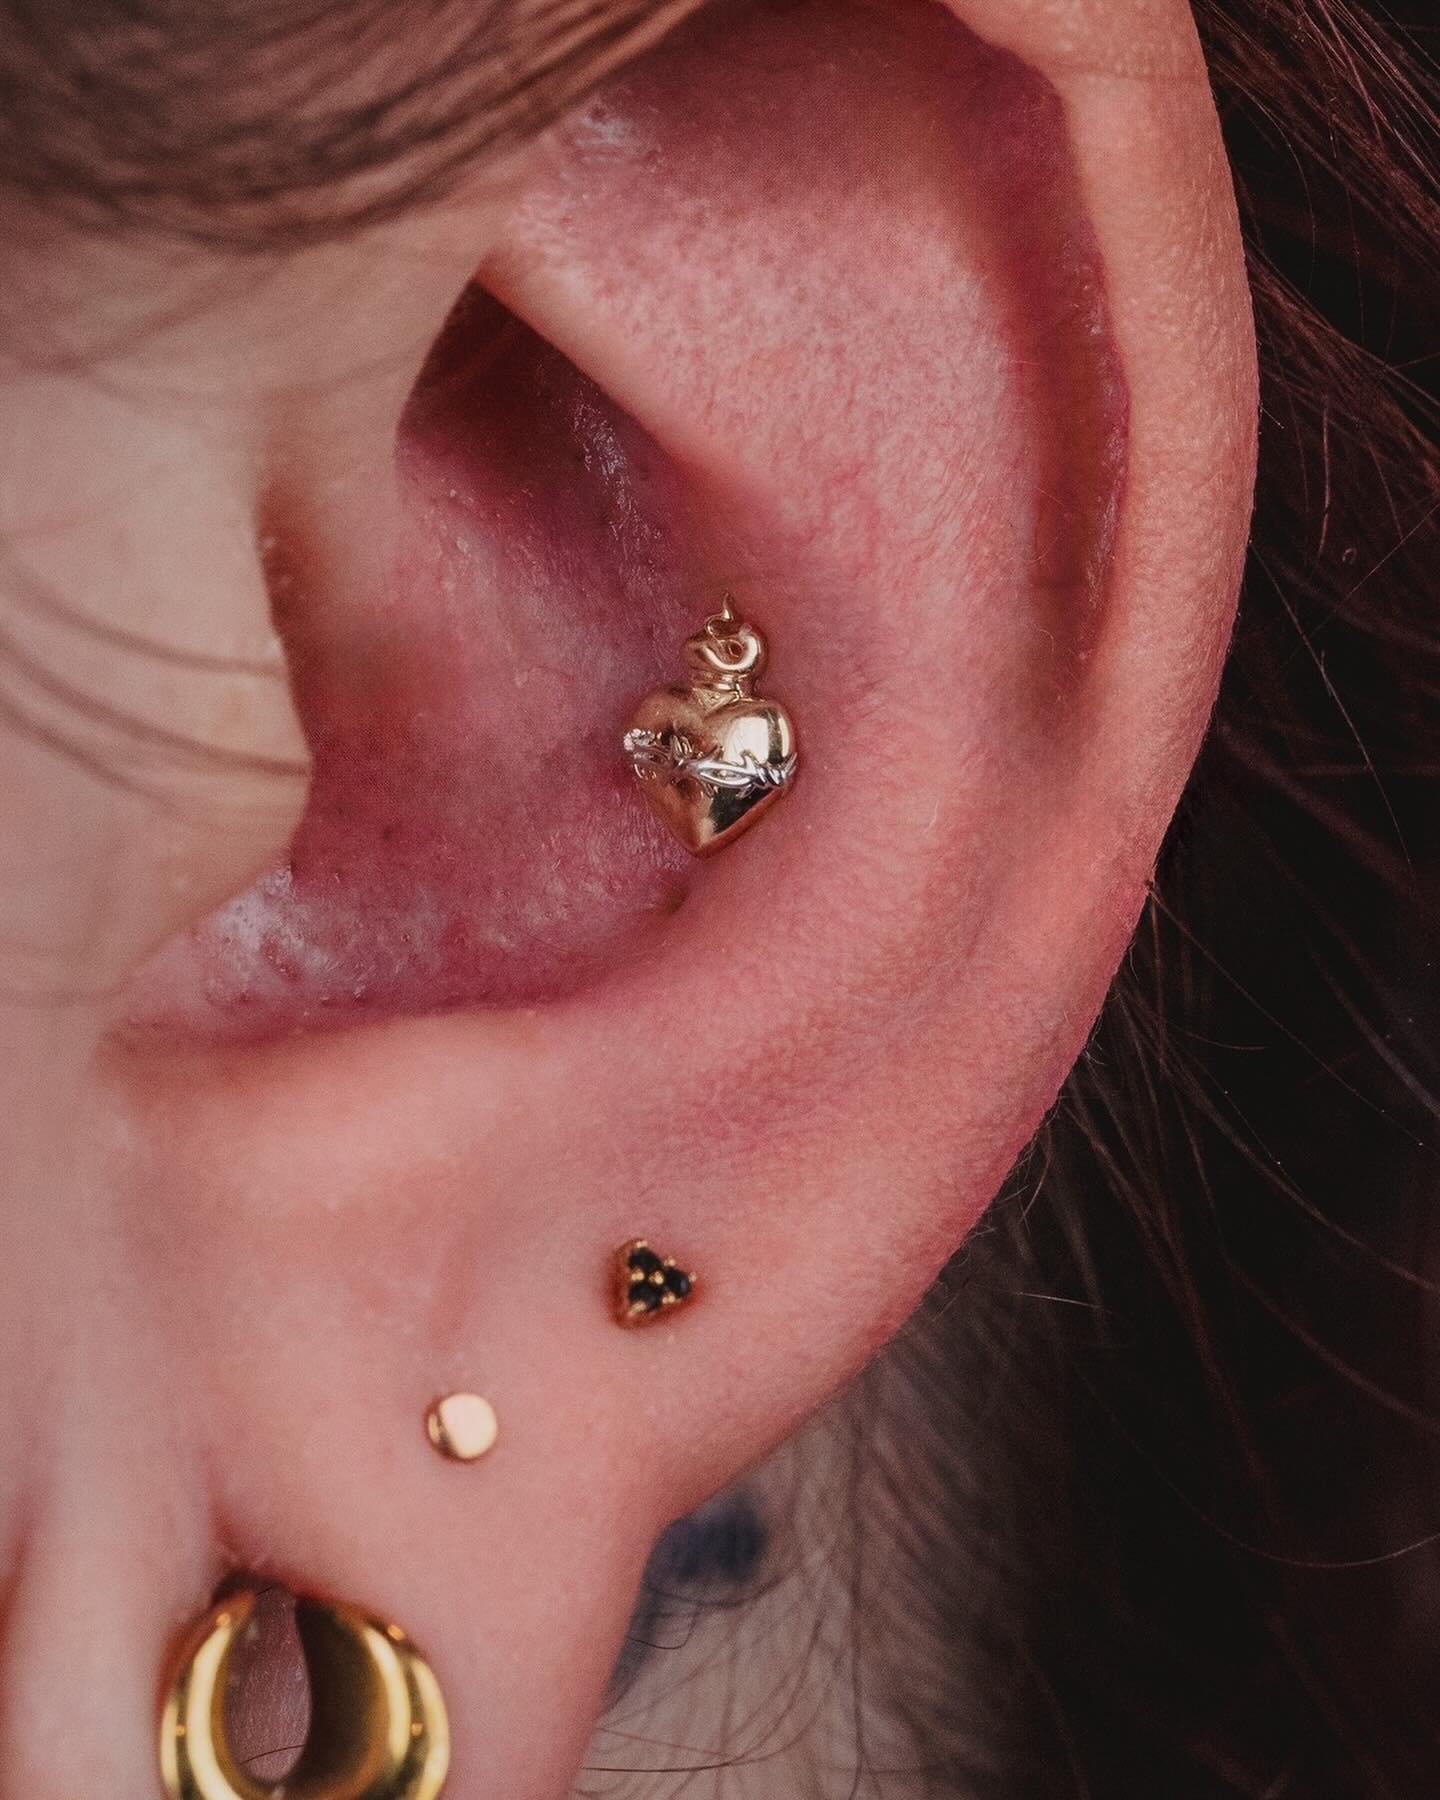 A SIDE🌌
 
OF ME
 
A super fun conch piercing with this Sacred Heart end from Junipurr for Emily, performed by William🗝️
⠀⠀⠀⠀⠀⠀⠀⠀⠀
~  @passenger.parasite ~ 
⠀⠀⠀⠀⠀⠀⠀⠀⠀
~  @junipurrjewelry ~
⠀⠀⠀⠀⠀⠀⠀⠀⠀
⠀⠀⠀⠀⠀⠀⠀⠀⠀
⠀⠀⠀⠀⠀⠀⠀⠀⠀
📸@mrbattle
~book your appoint